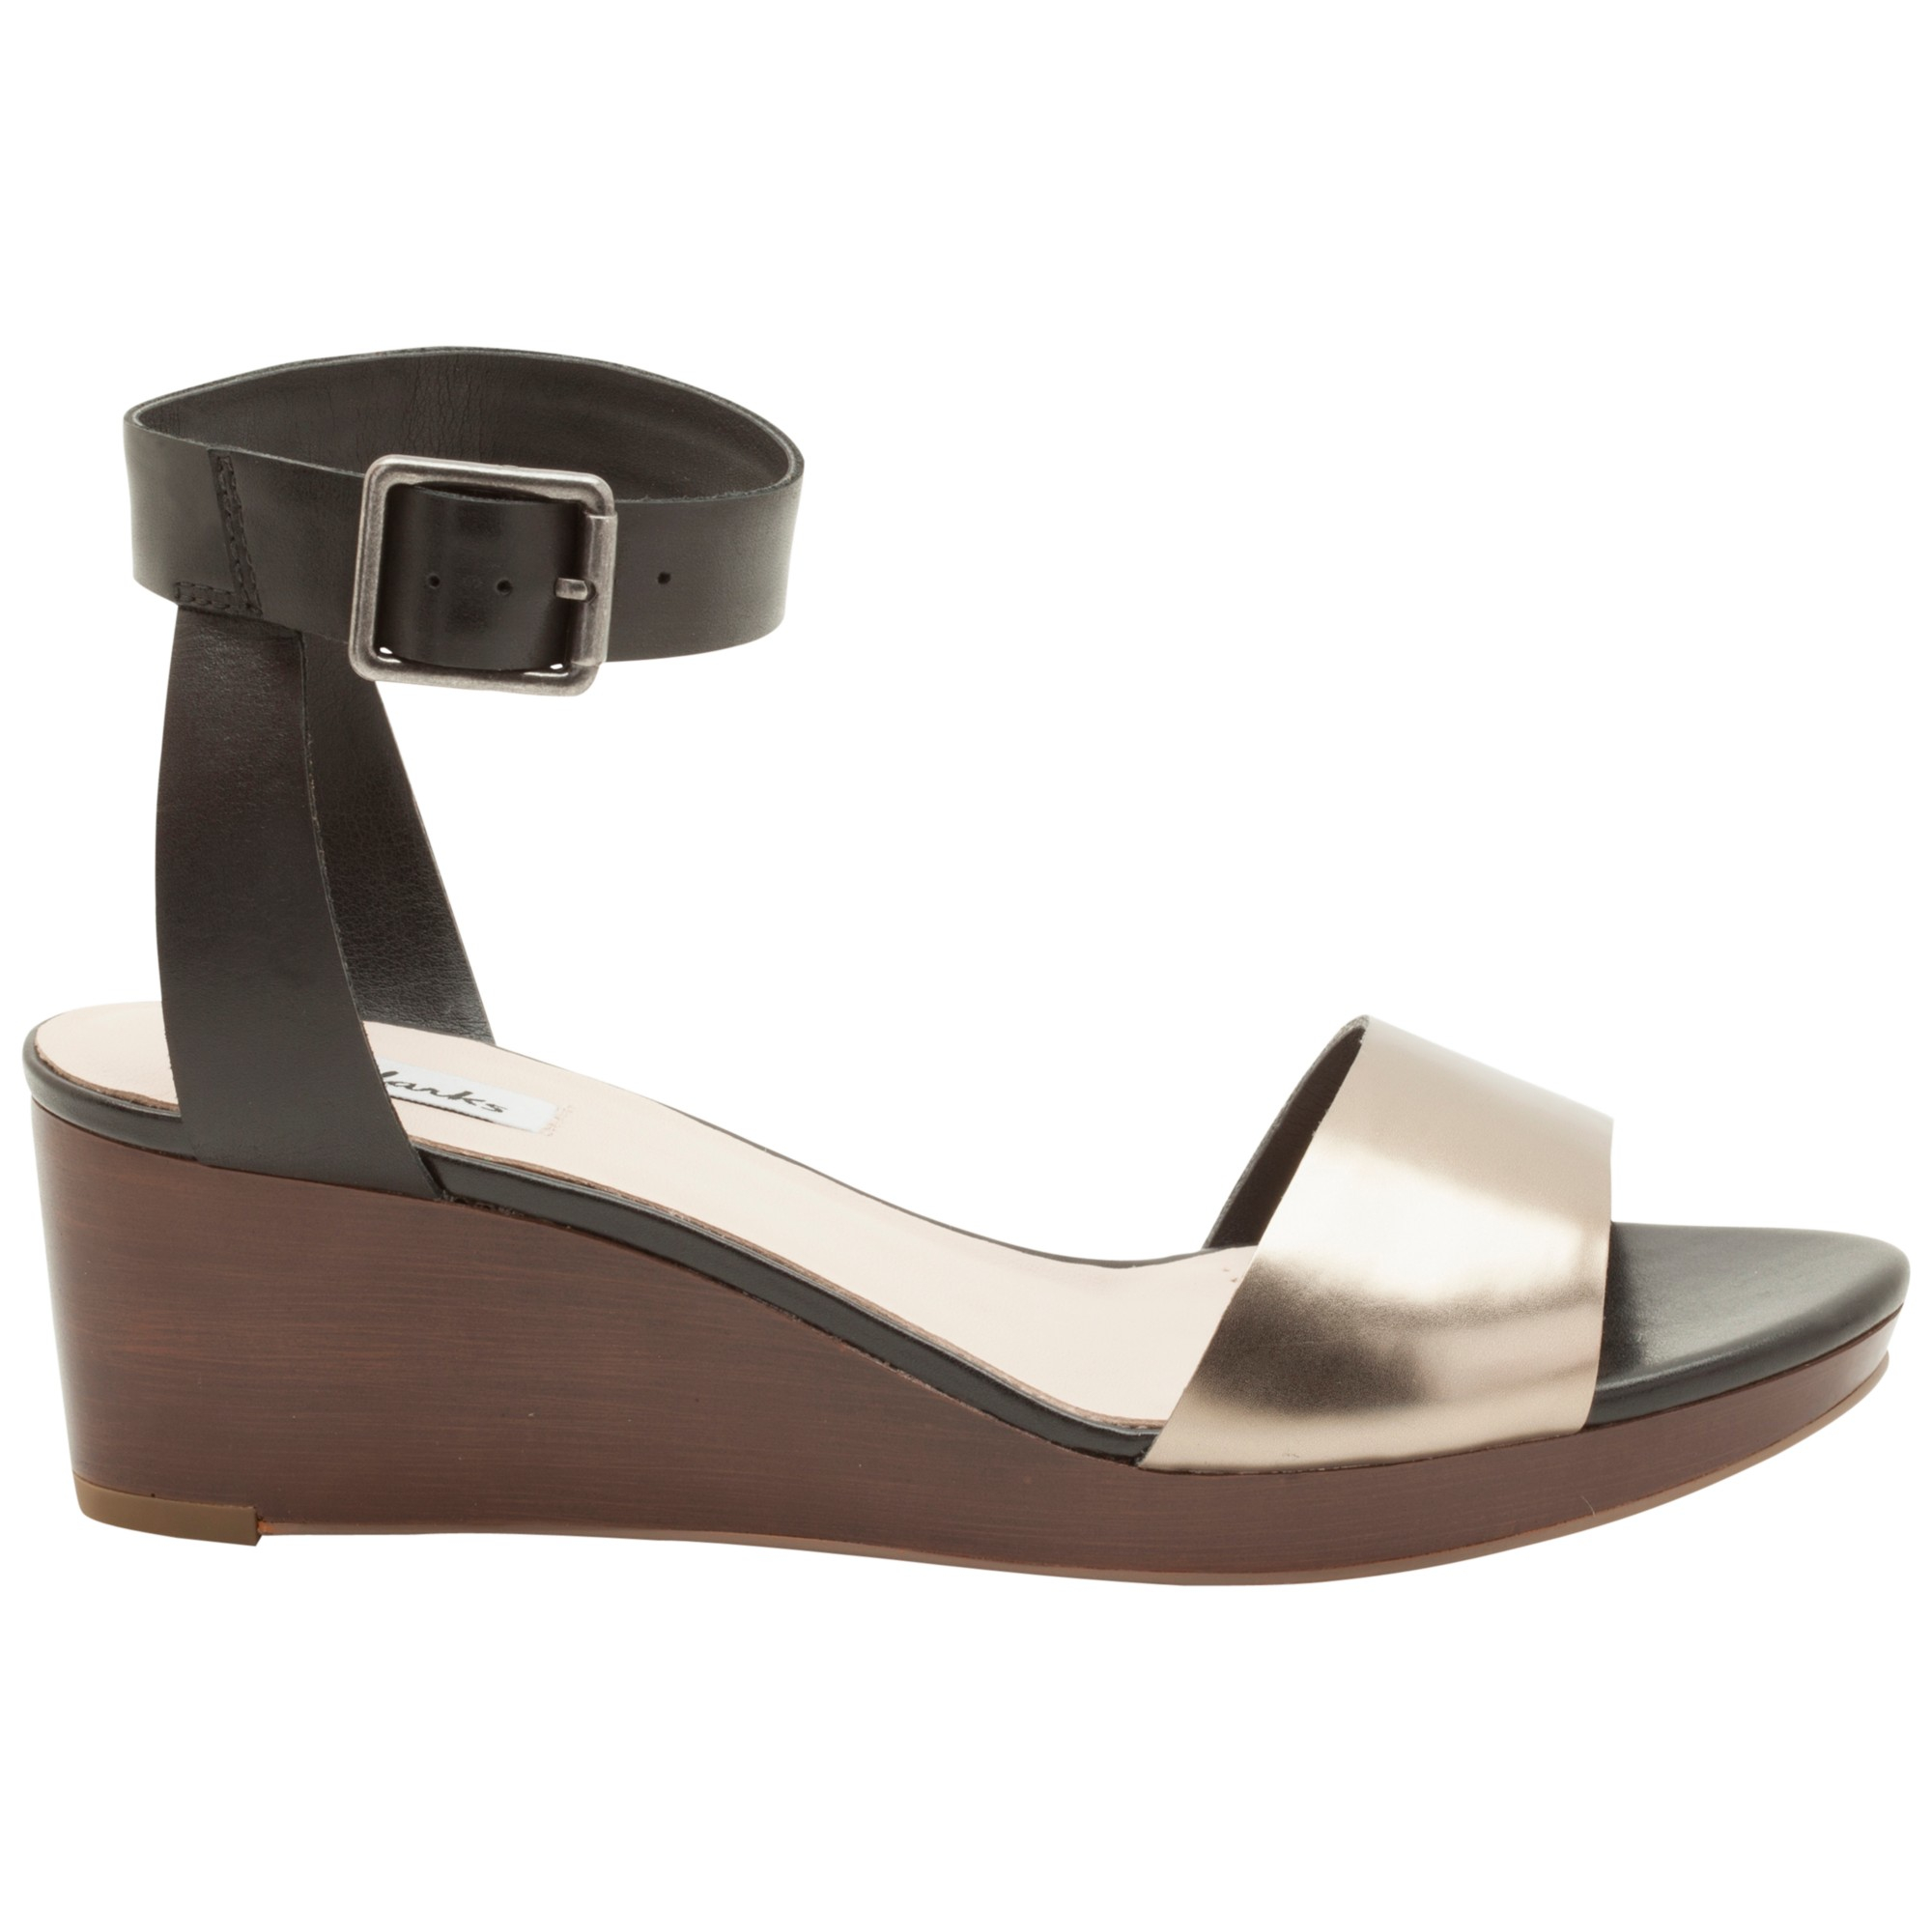 clarks ornate jewel two part wedge black sandals